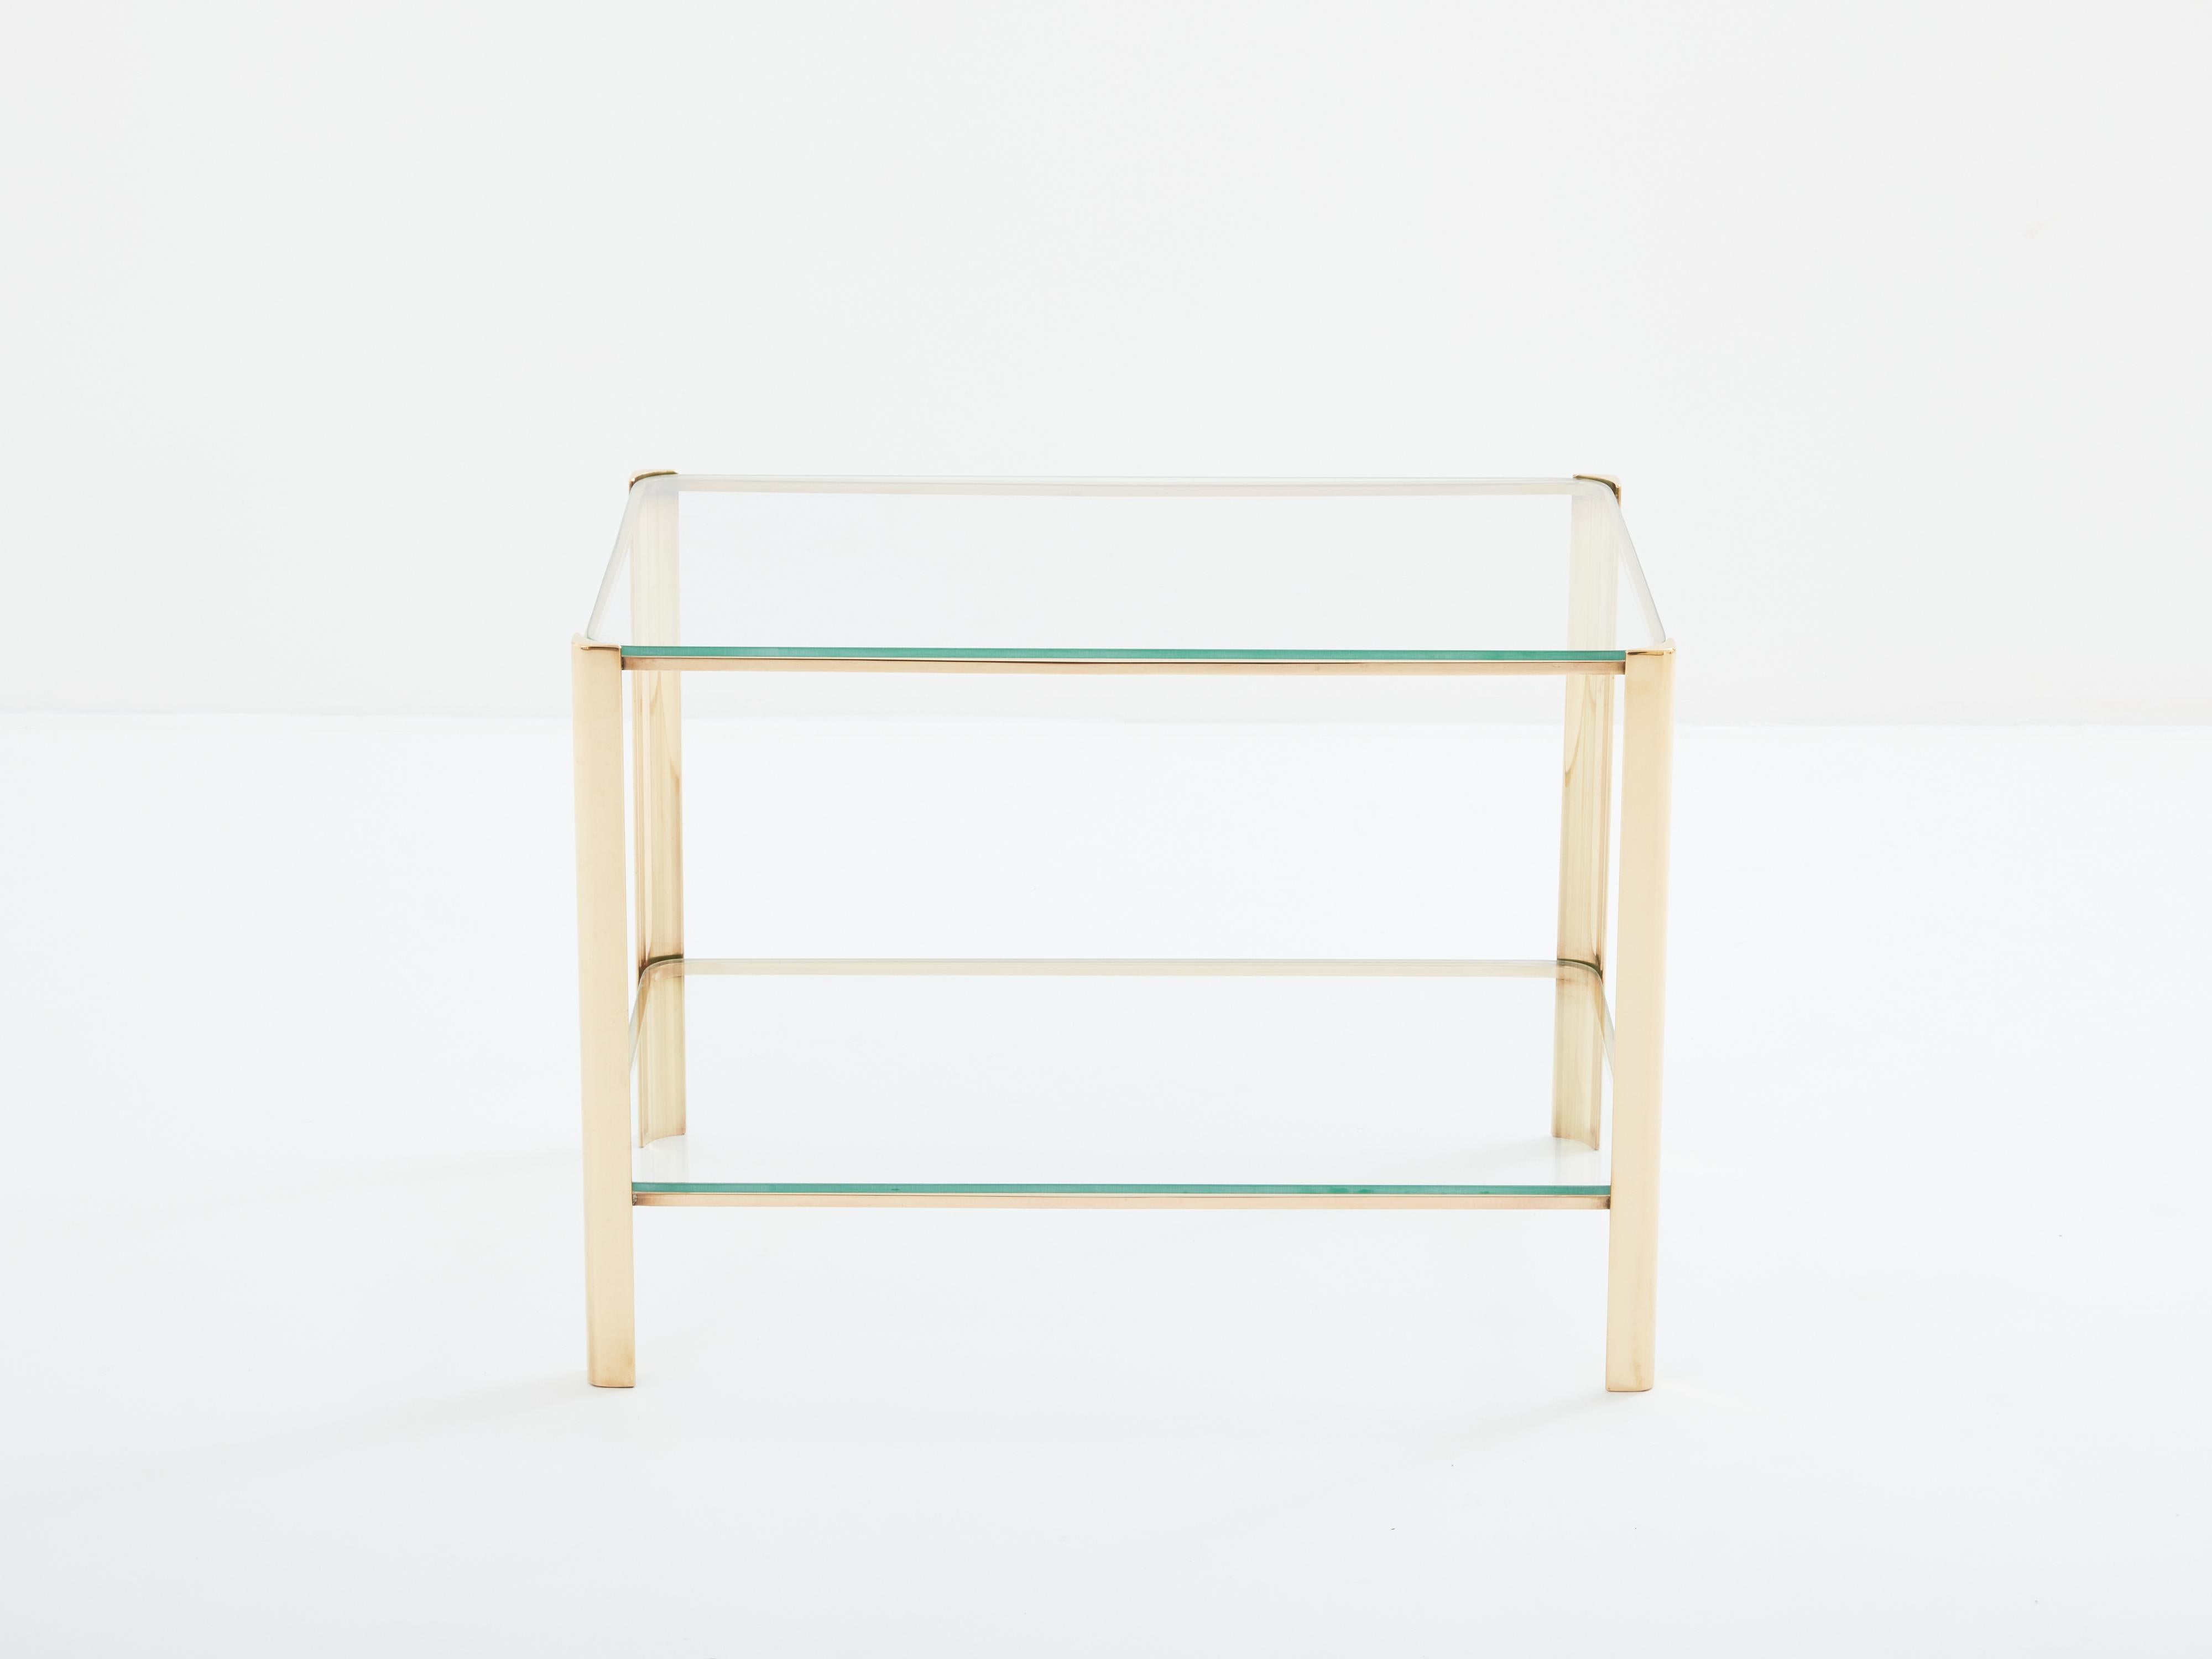 Two-tier Bronze glass side table by Jacques Quinet for Broncz 1960s For Sale 2